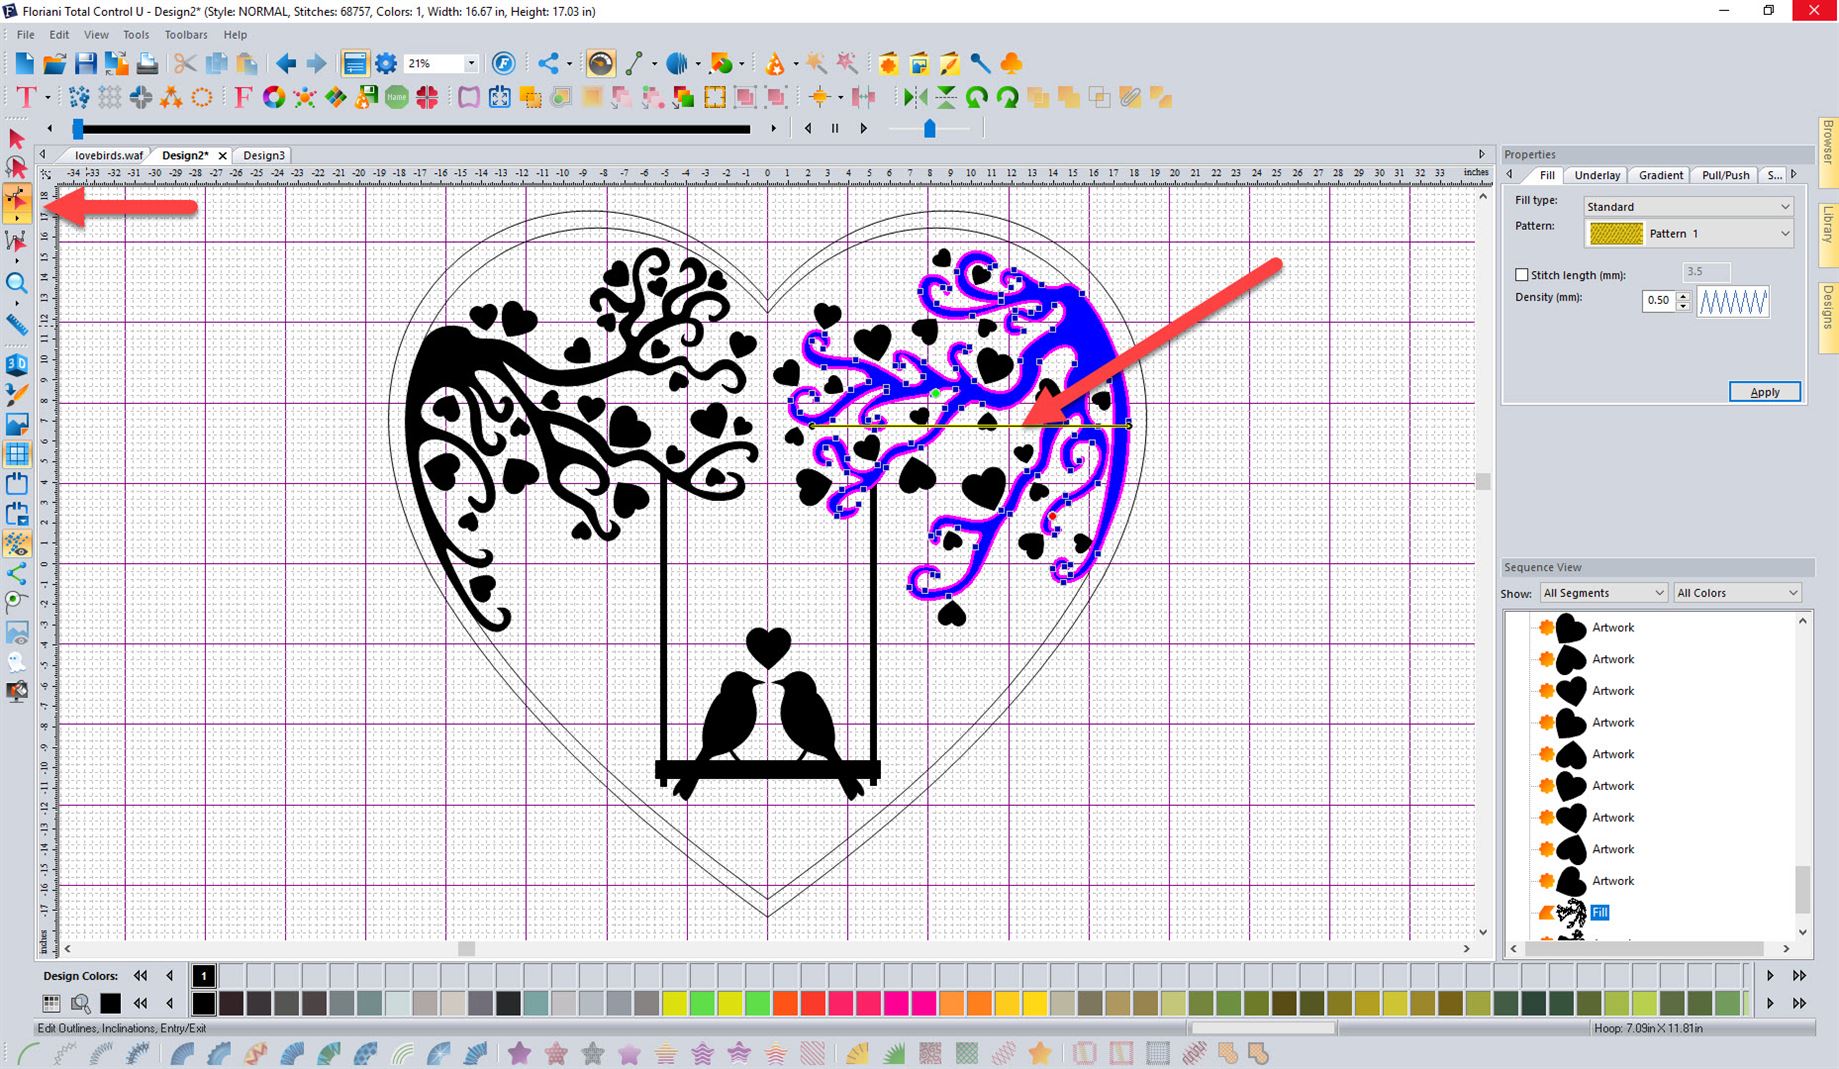 Screen shot from FTCu software of lovebirds embroidery file with branches selected to view as control points for modifying shape of design